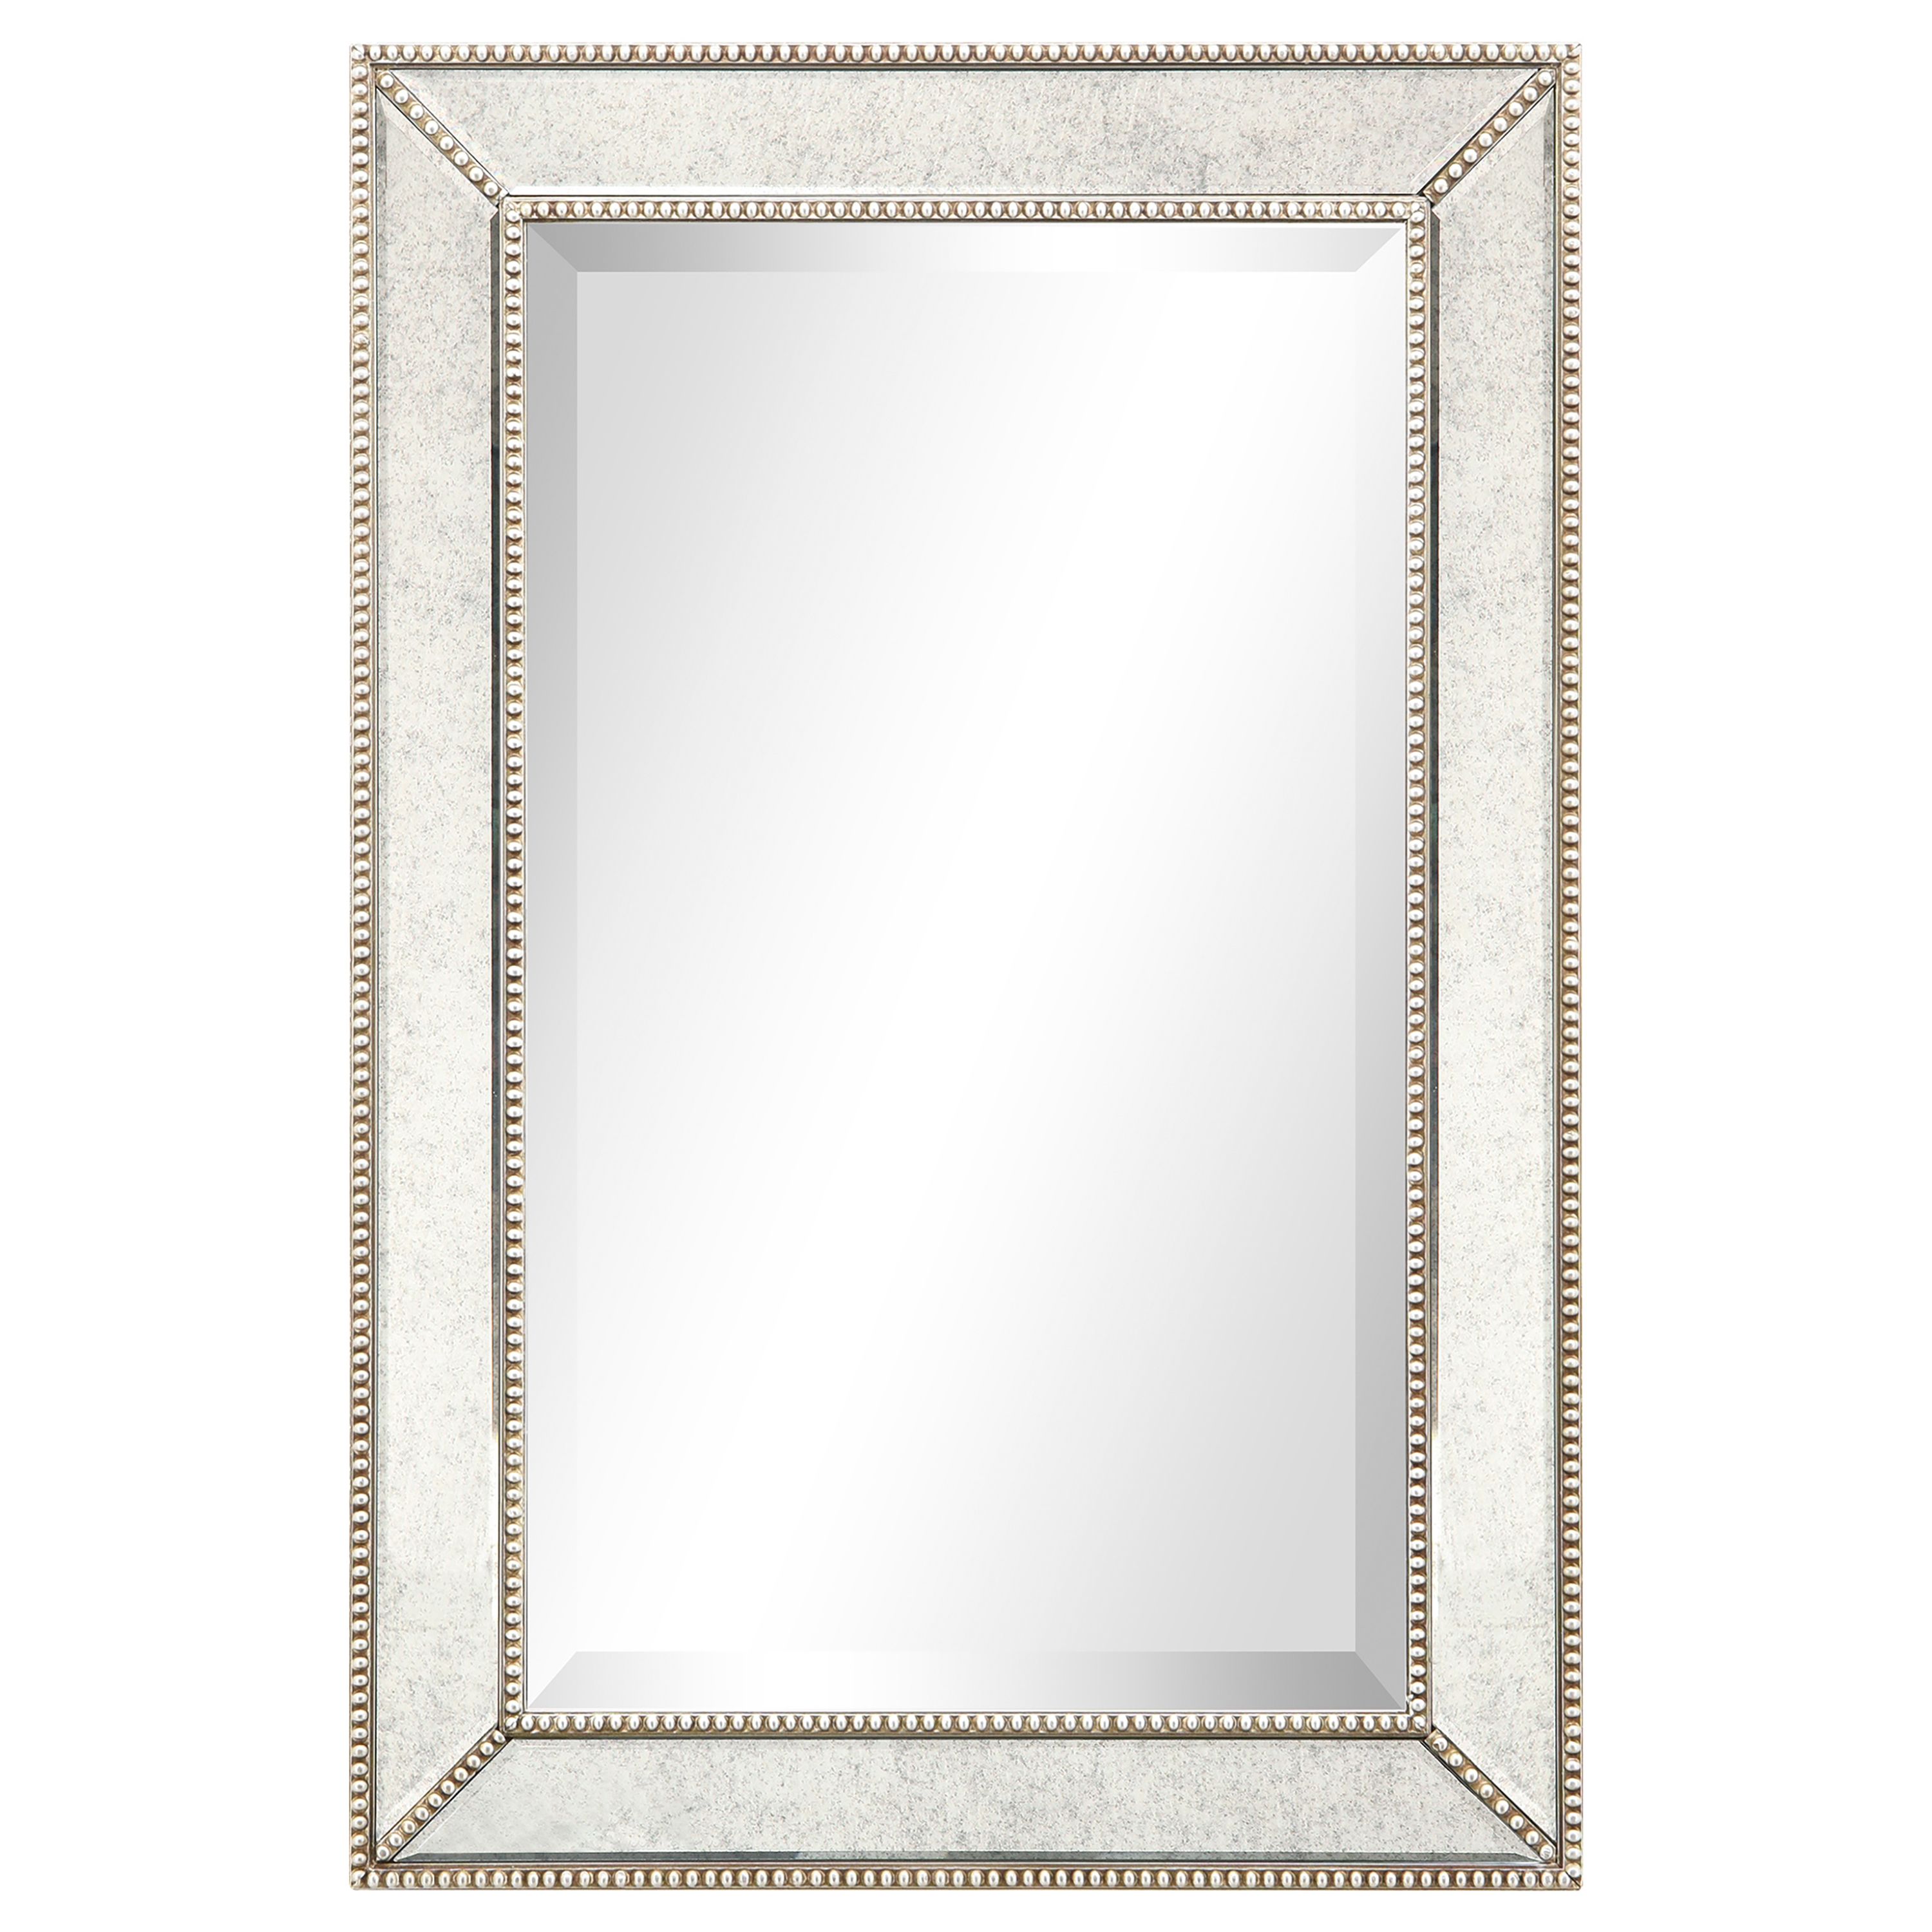 Mom-20210anp-2030 20 X 30 In. Solid Wood Frame Covered Wall Mirror With Beveled Antique Mirror Panels - 1 In. Beveled Edge